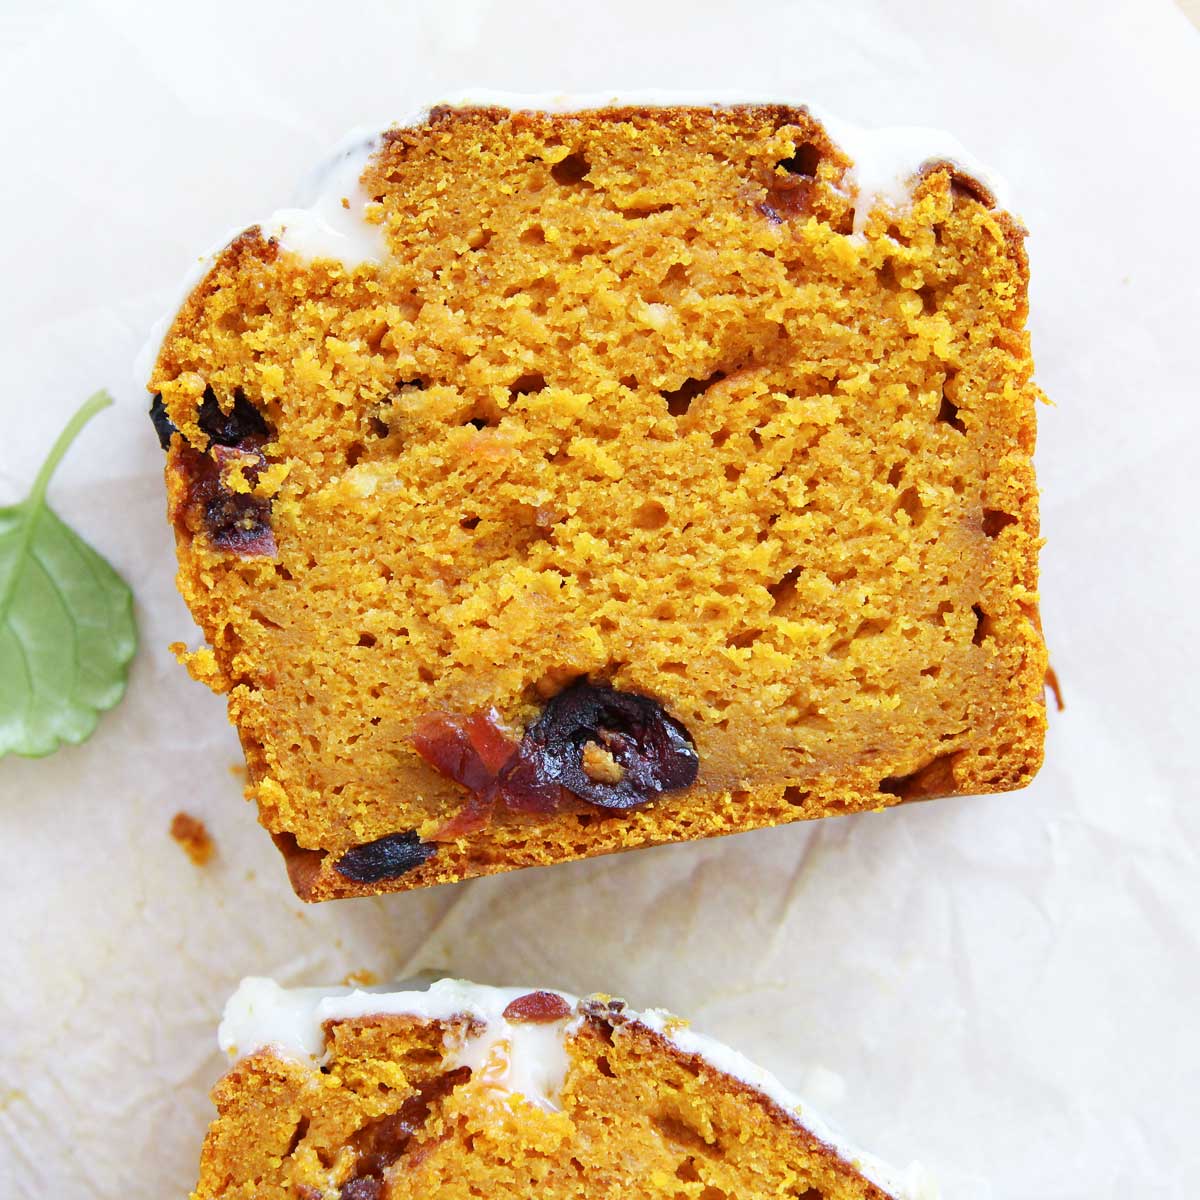 Cranberry Pumpkin Bread with Simple Orange Marmalade Glaze - Sweet Potatoes in the Microwave